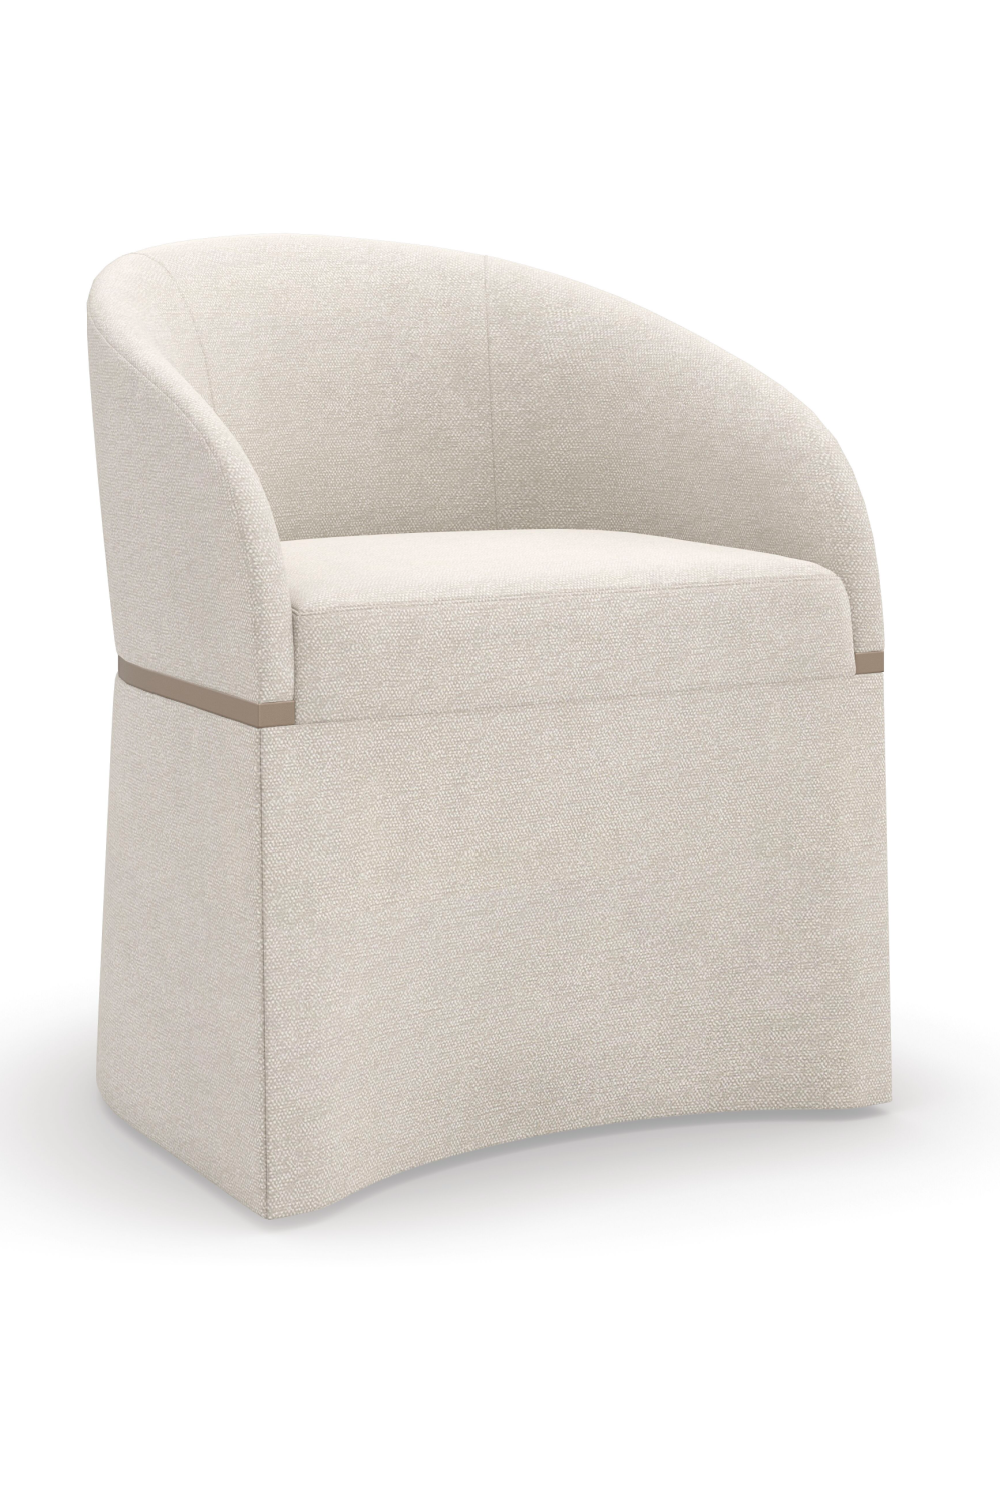 Ivory Fabric Accent Chair | Caracole Dune | Oroa.com